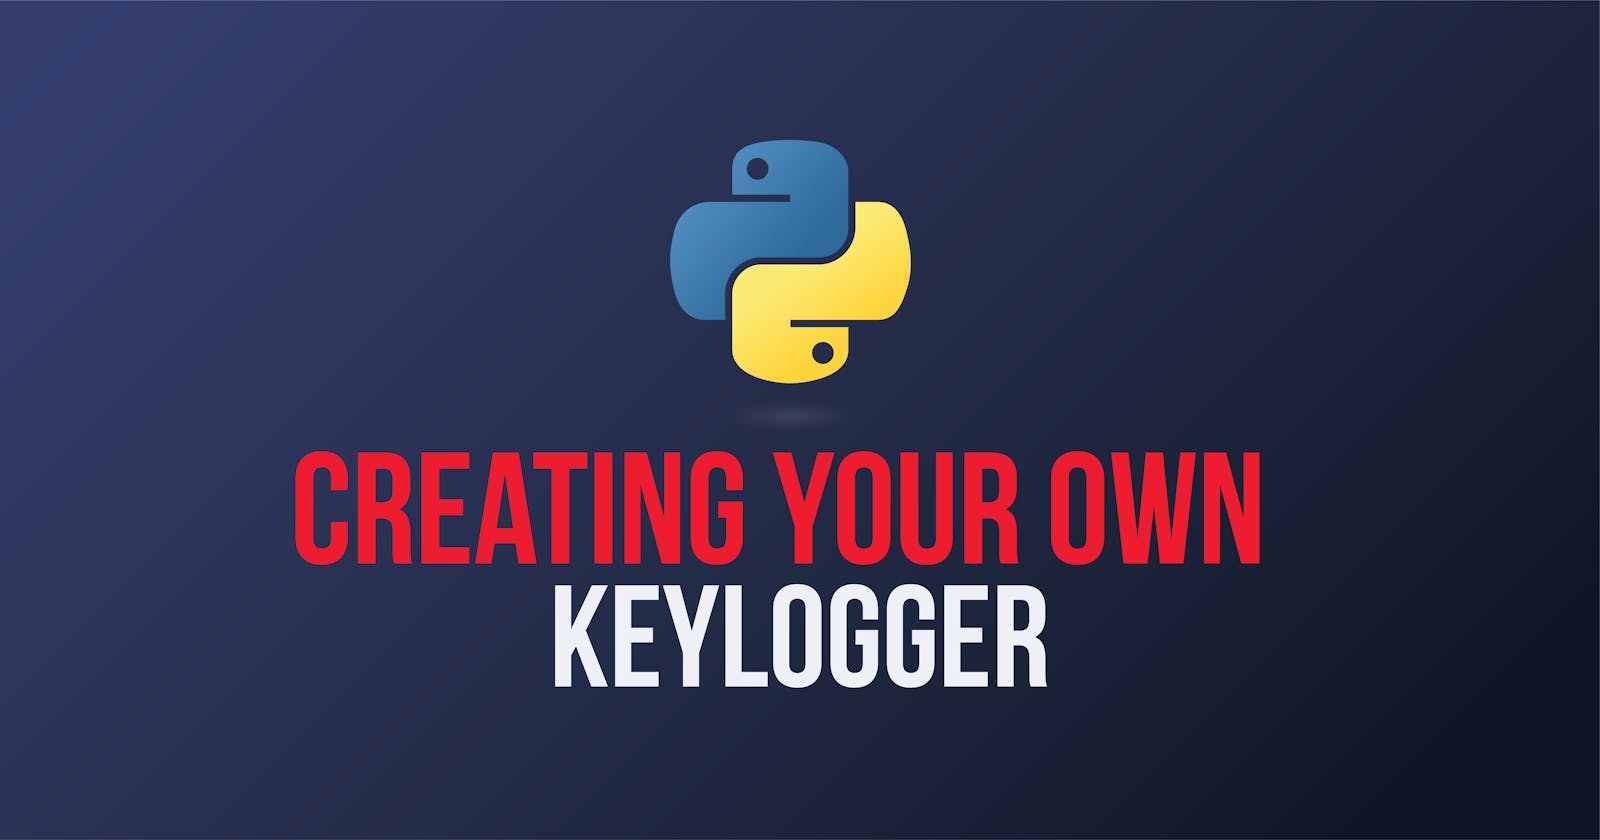 Creating Your Own Keylogger